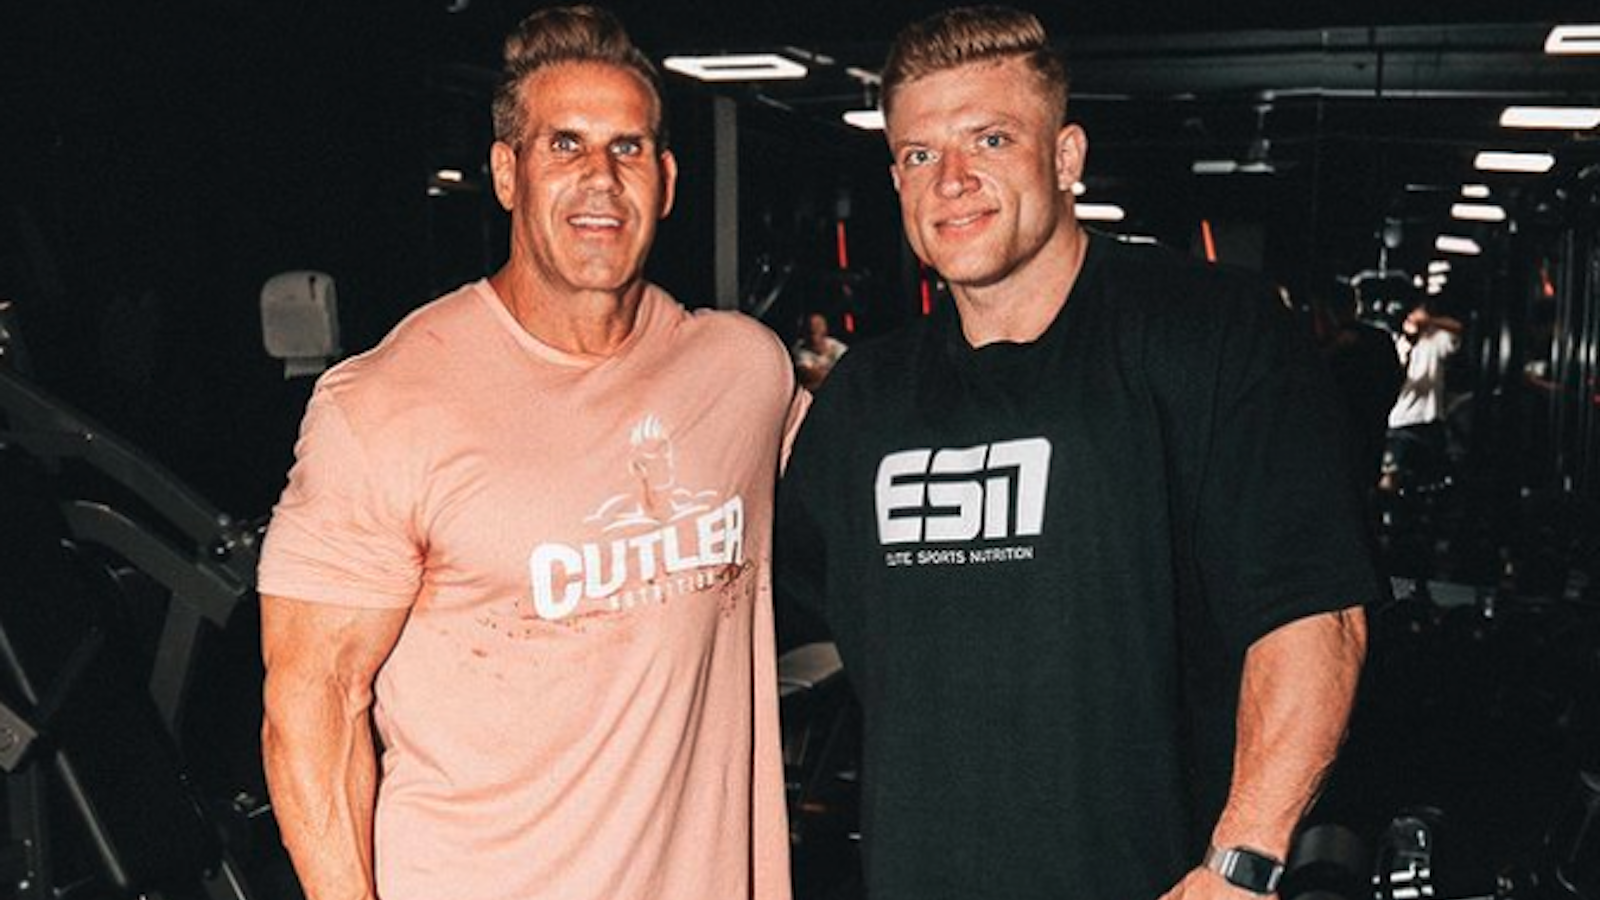 4-Time Mr. Olympia Jay Cutler Trains Urs Kalecinski Through Chest Day